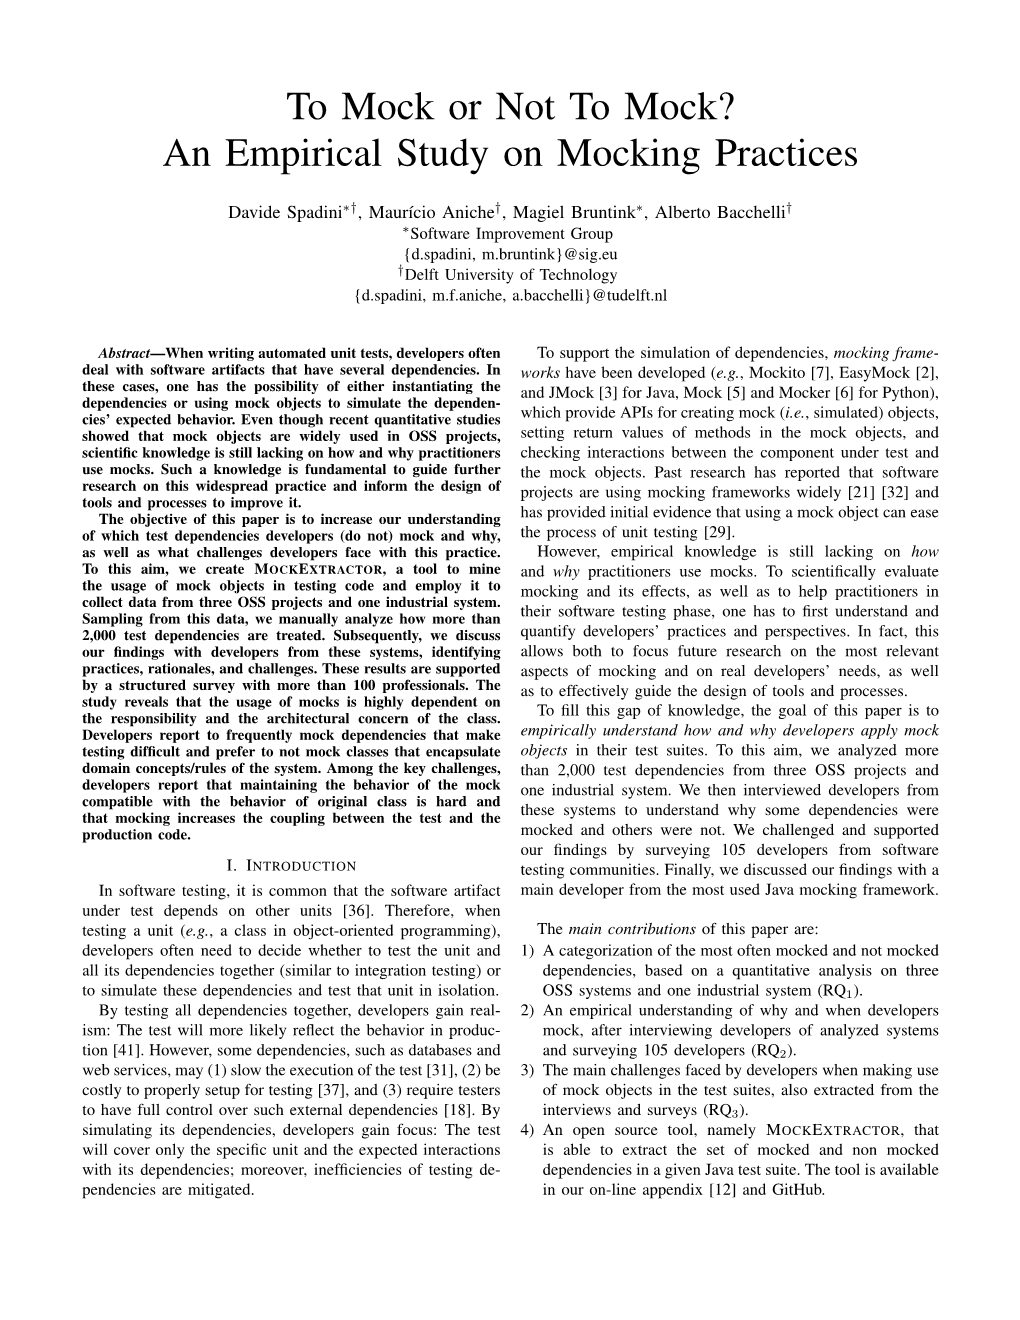 To Mock Or Not to Mock? an Empirical Study on Mocking Practices